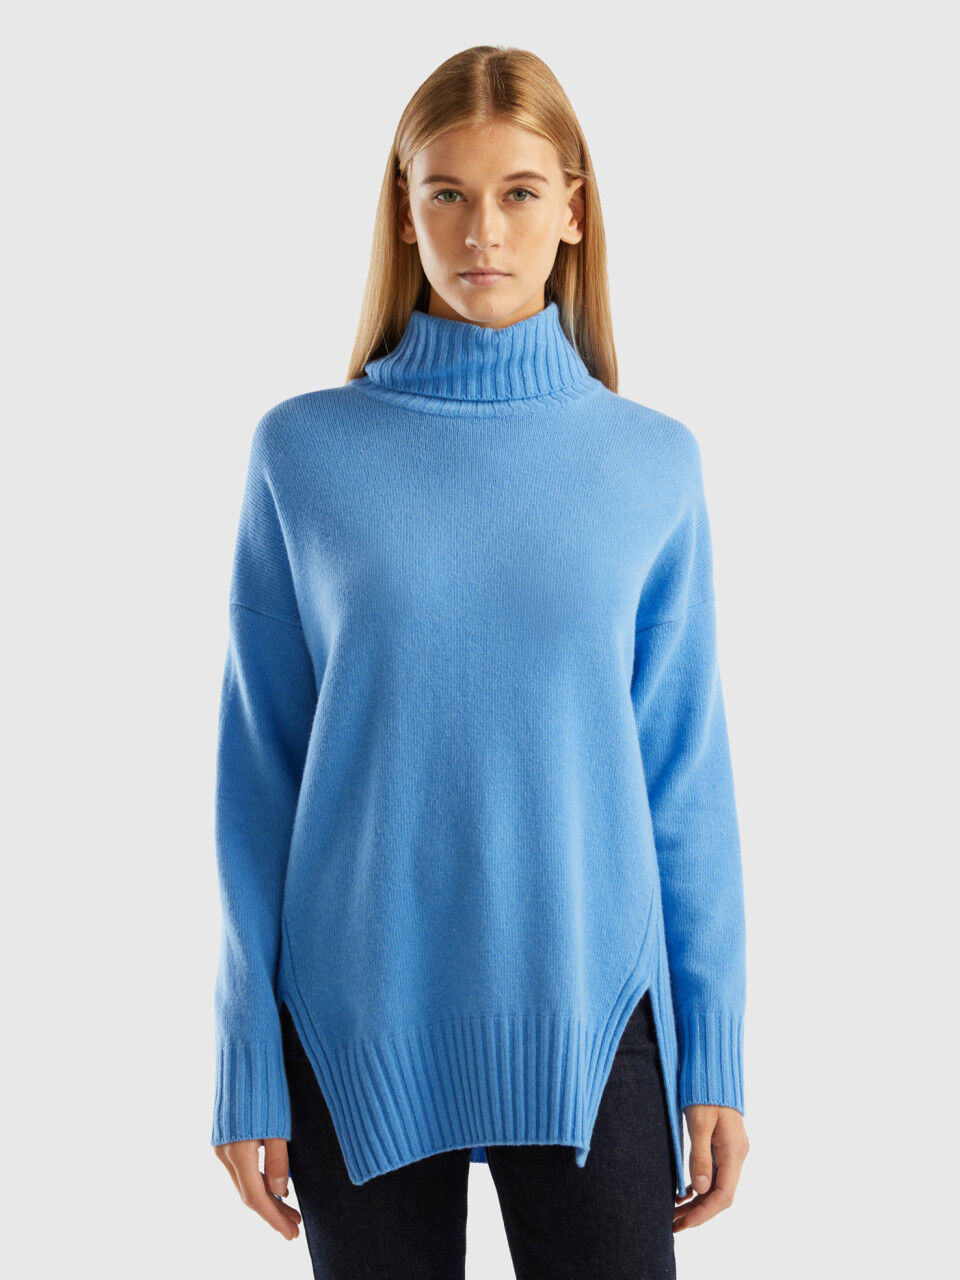 Women's High Neck Sweaters New Collection 2023 | Benetton